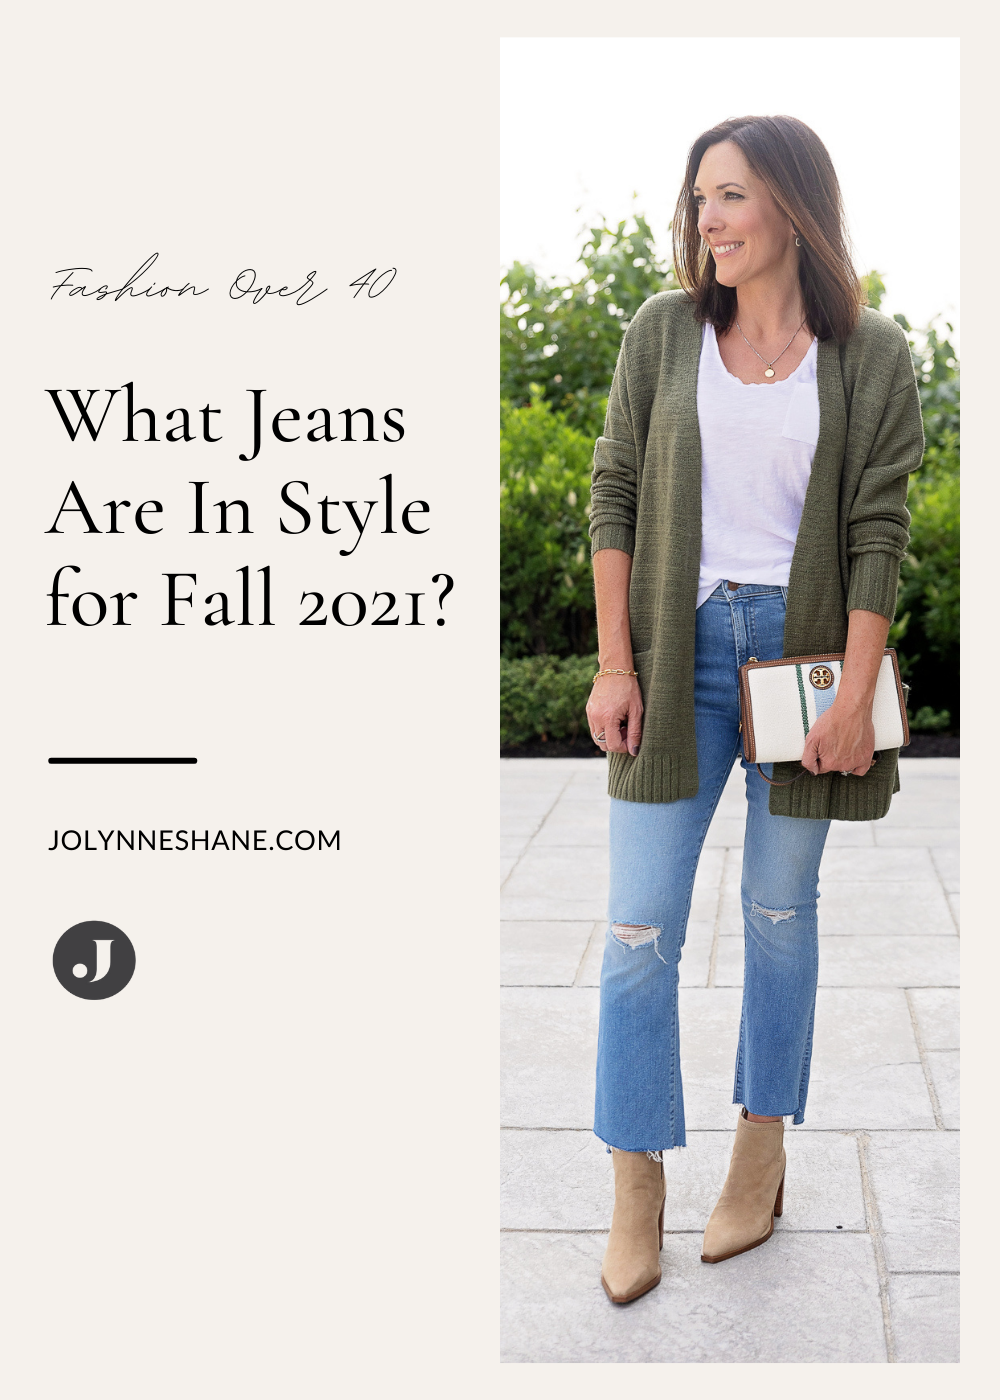 2021 Fashion Trends For Jeans